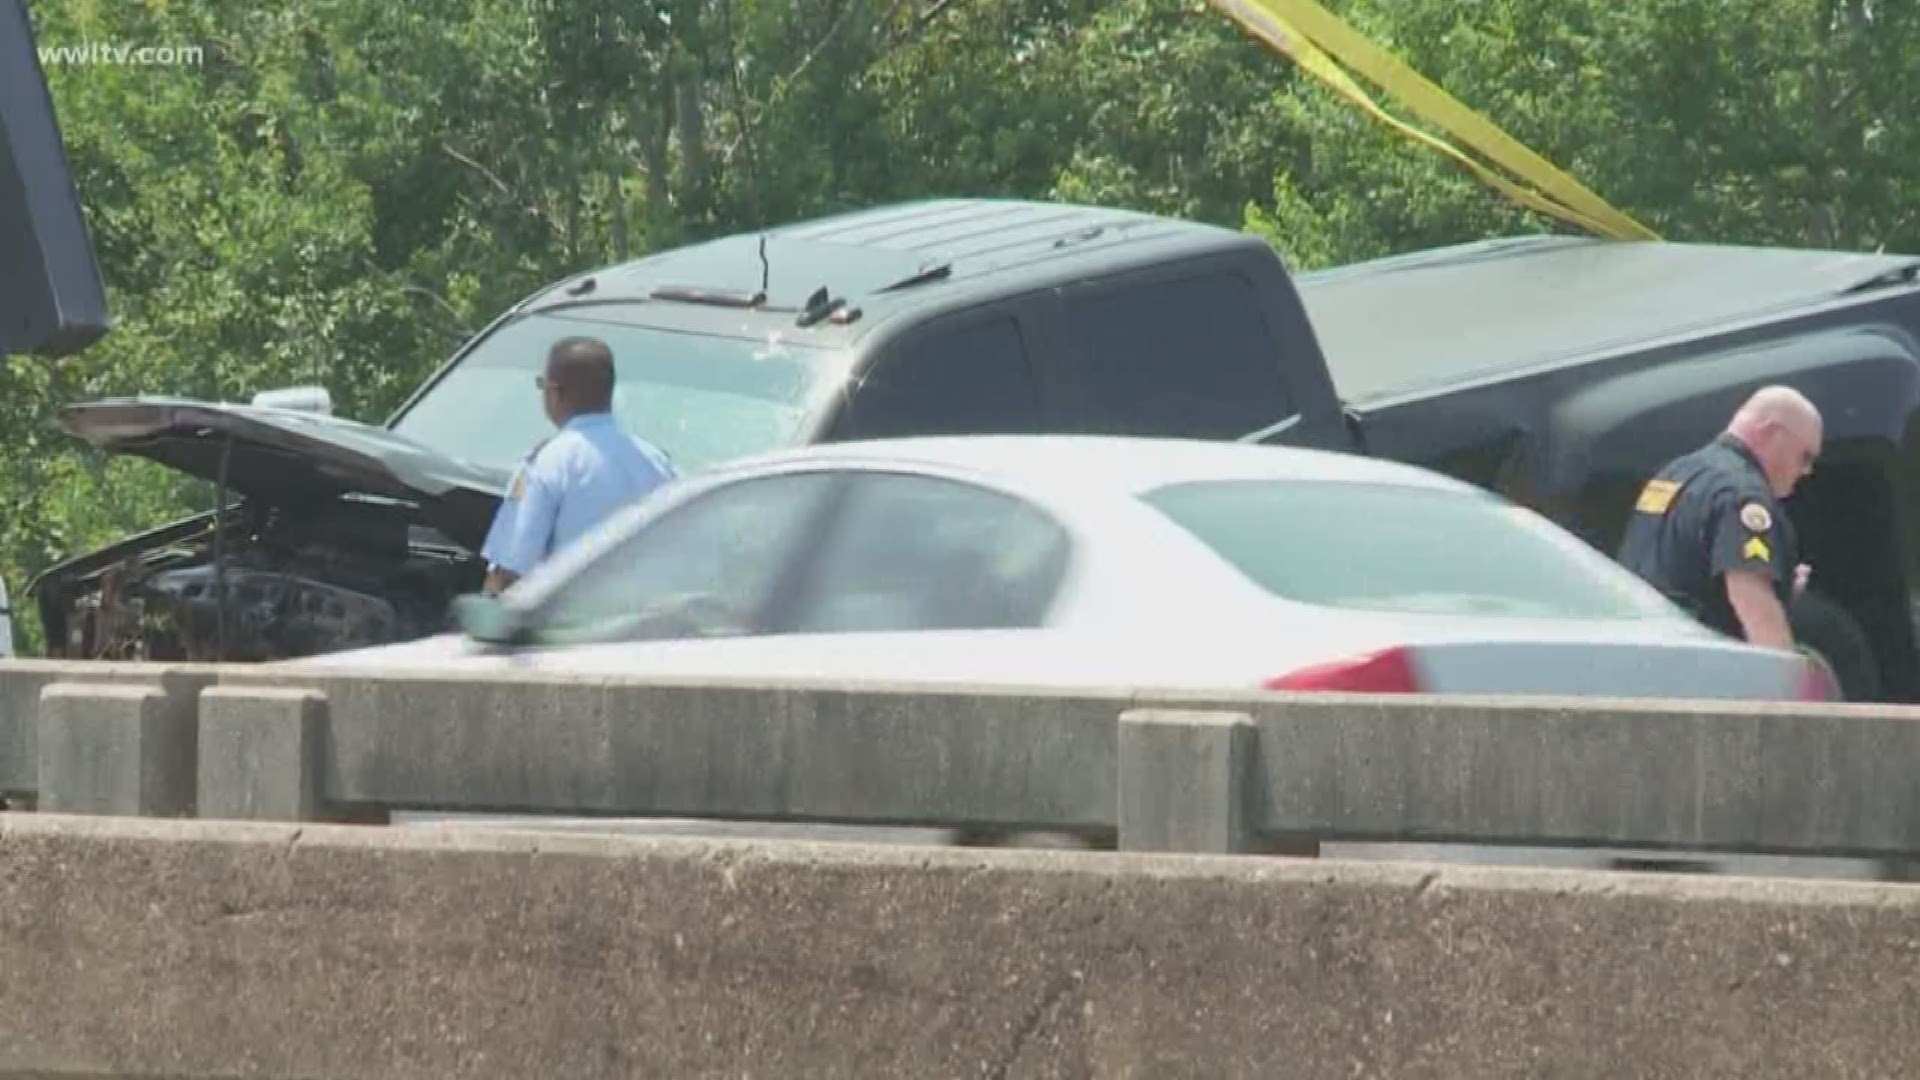 According to the New Orleans Police Department, the vehicle was pulled from the water near I-10 and Michoud Boulevard.